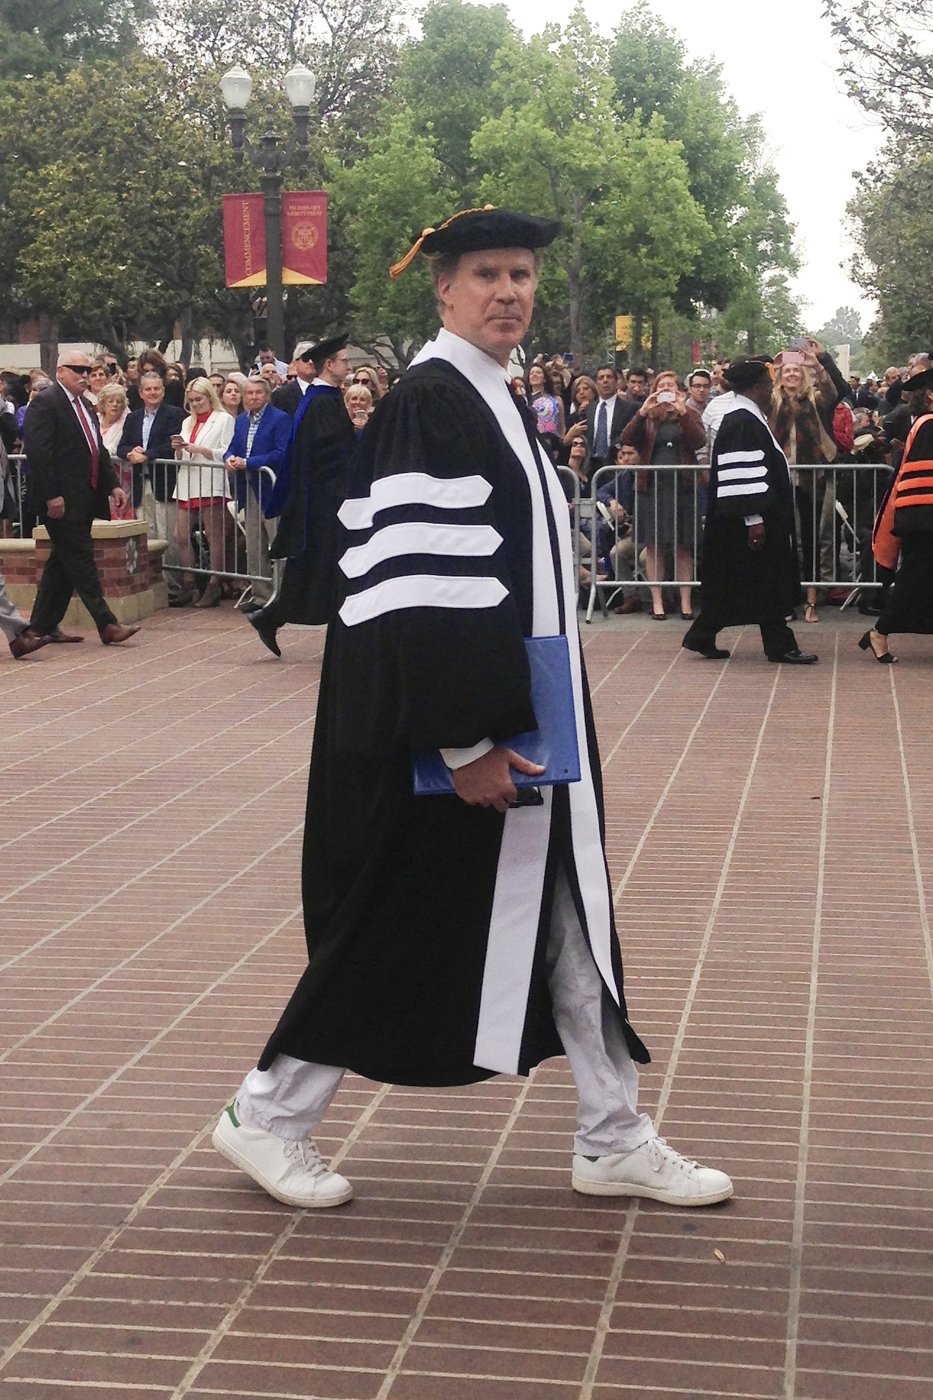 University of Southern California alum Will Ferrell arrives to give the keynote commencement address at his alma mater on May 12, 2017